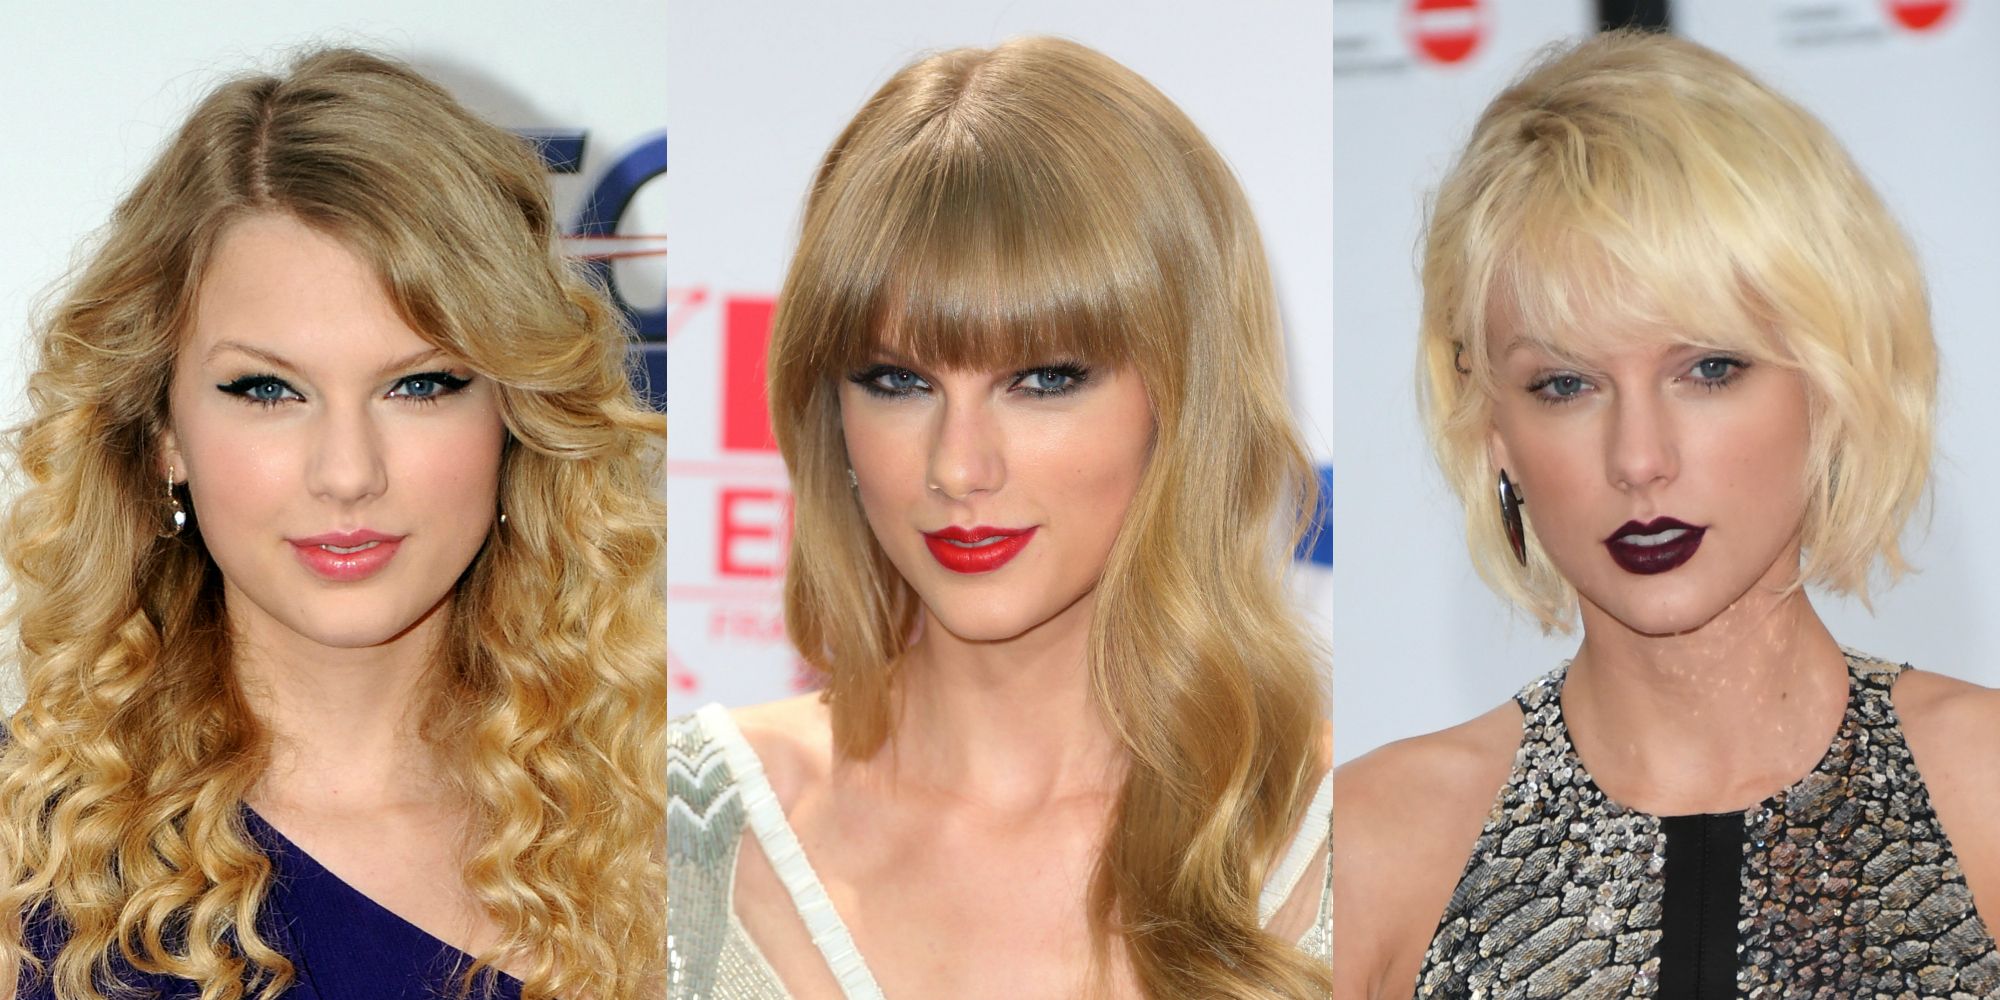 26 Taylor Swift Hairstyles  Celebrity Taylors Hairstyles Pictures   Pretty Designs  Taylor swift hair Hair styles Hair